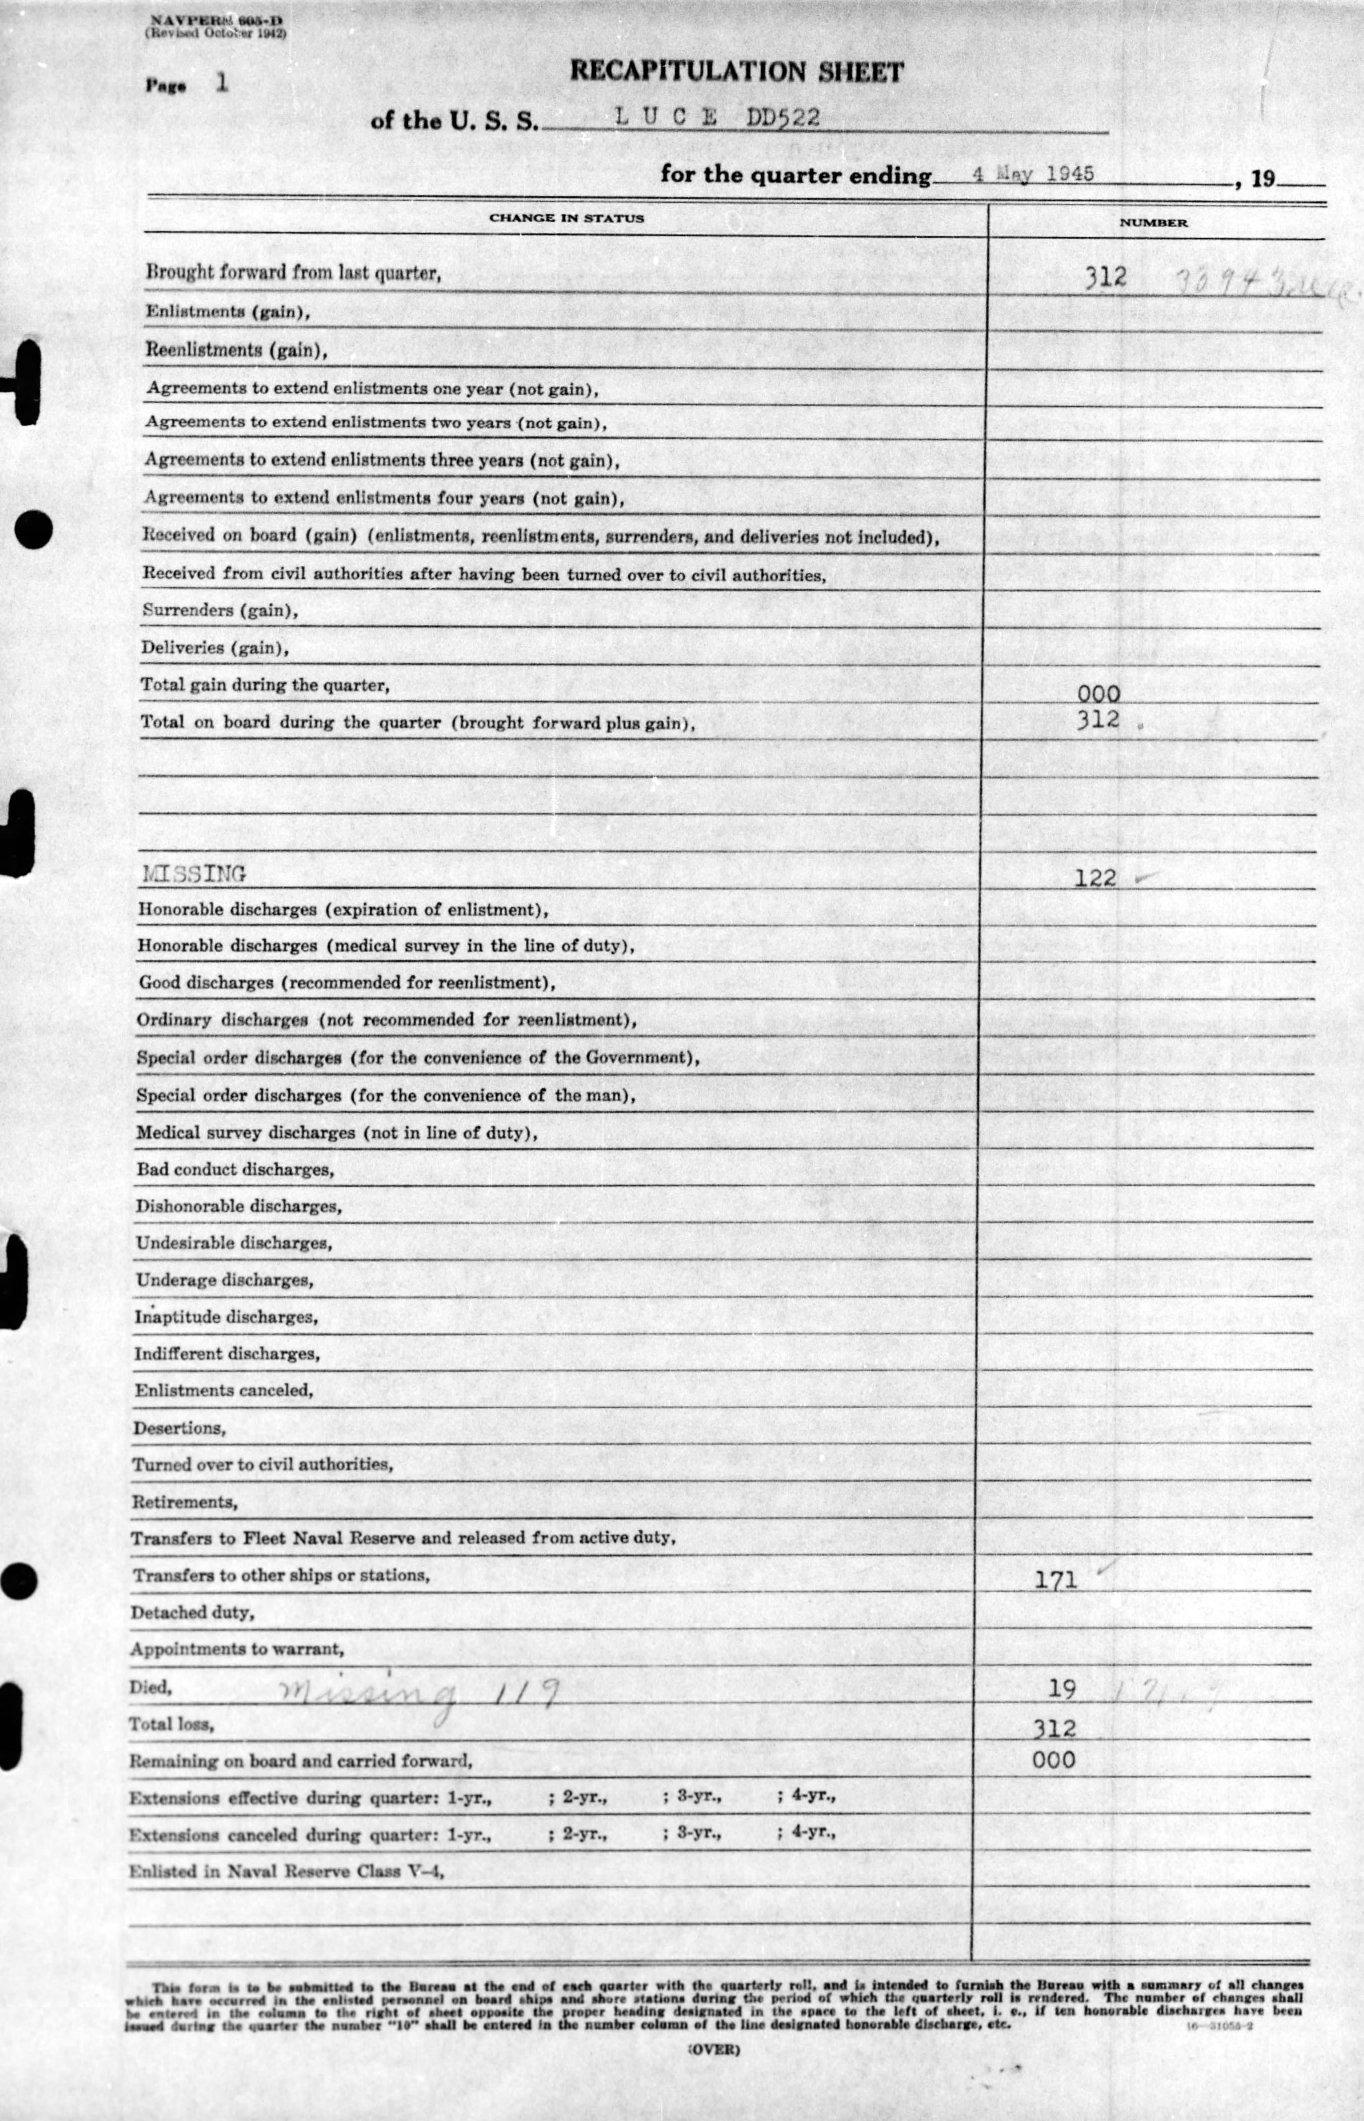 USS Luce final muster list dated June 19, 1945 after the ship was sunk May 4, 1945. Page 24 of 25.